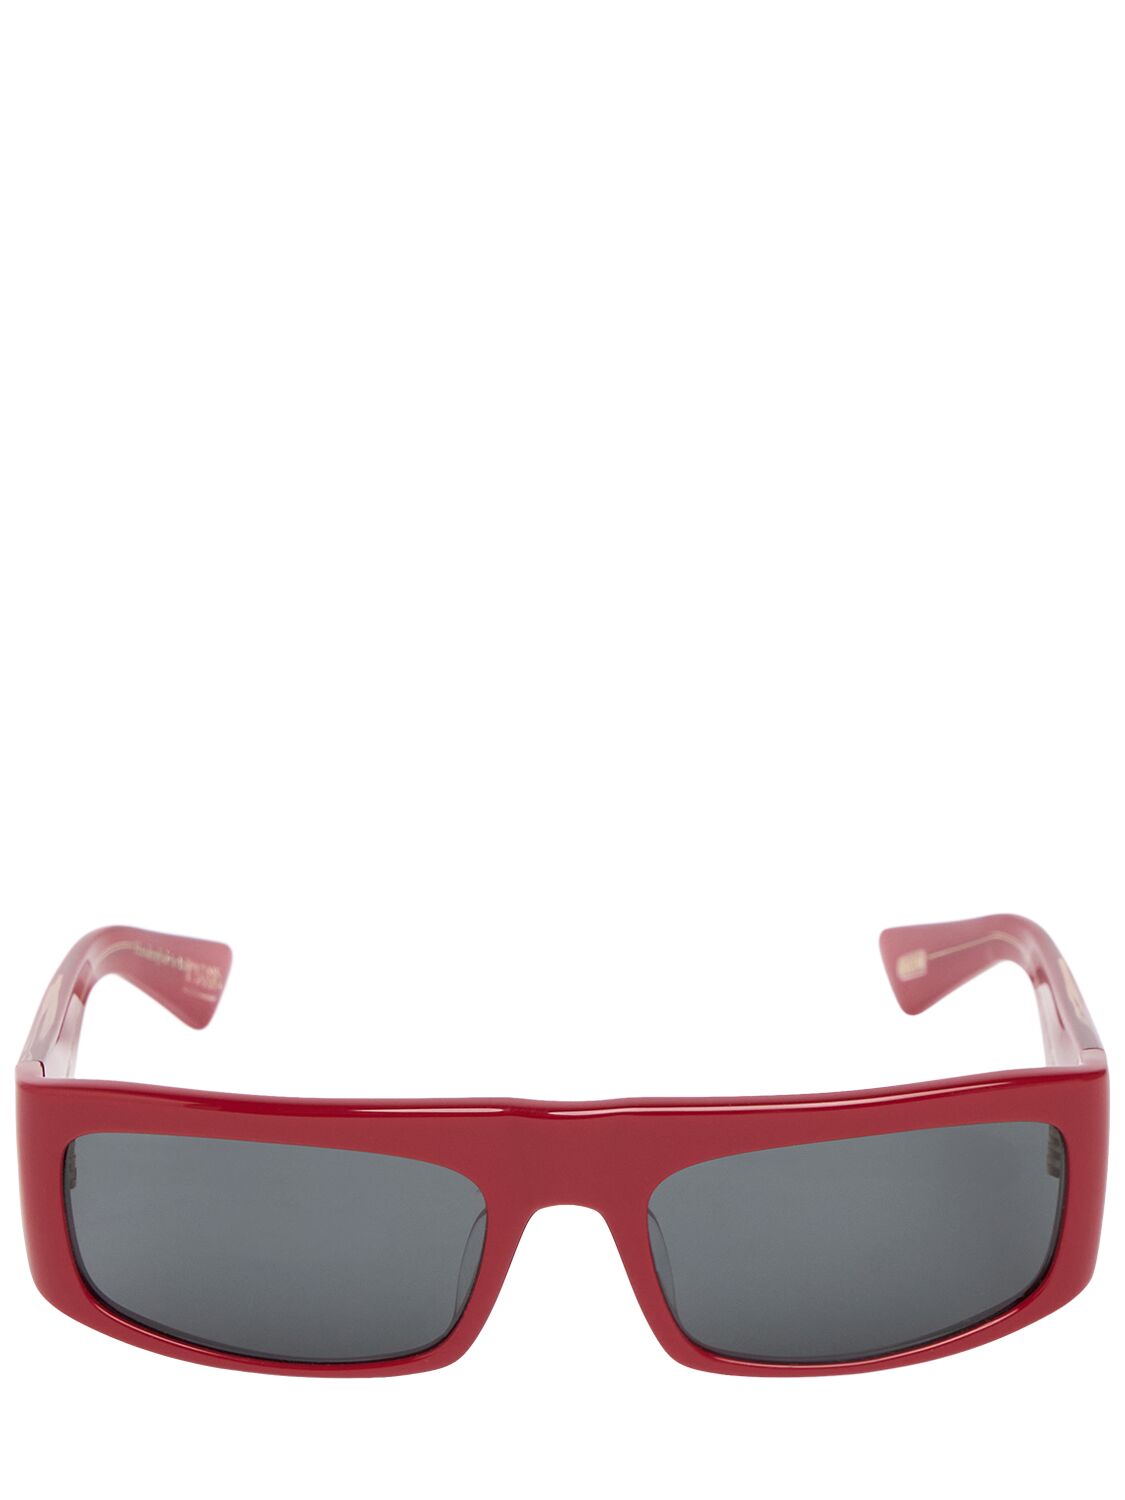 Khaite X Oliver Peoples Sunglasses In Red/grey